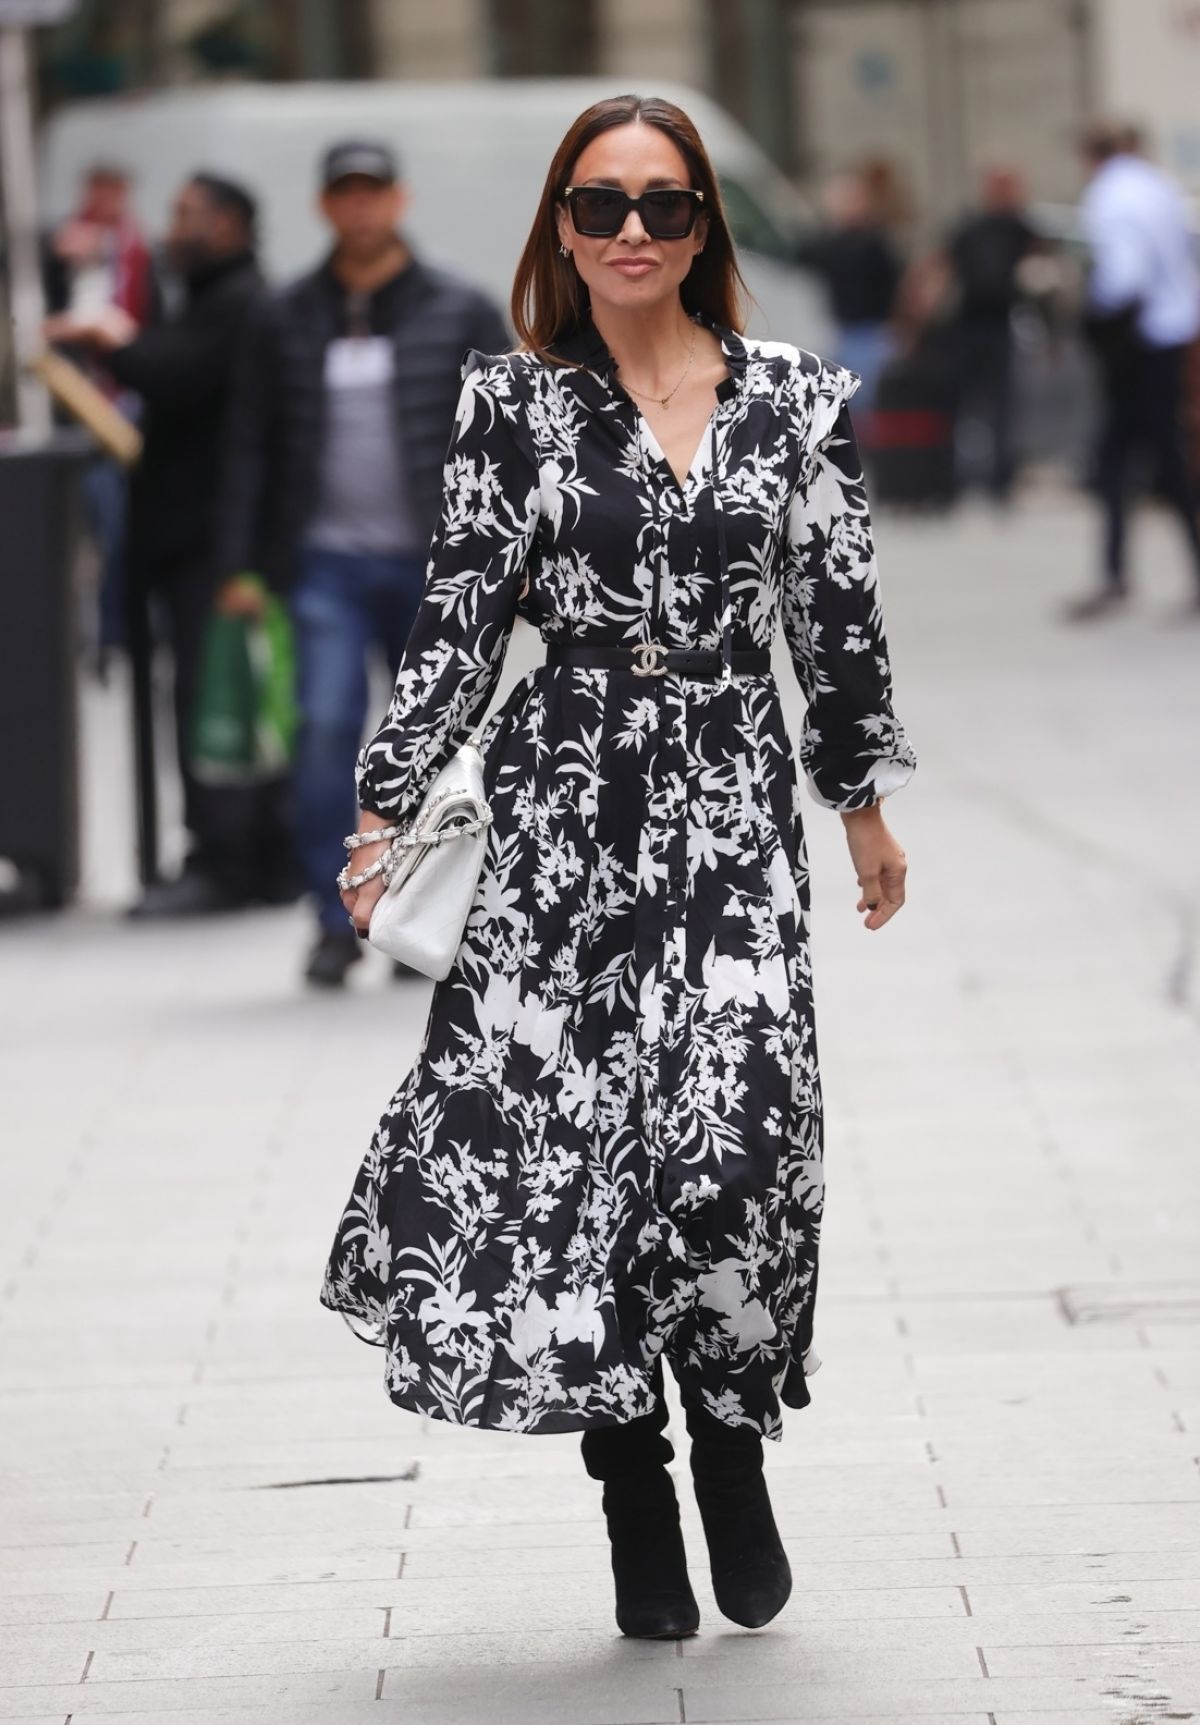 MYLEENE KLASS Arrives at Her Radio Appearance at Smooth Radio in London ...